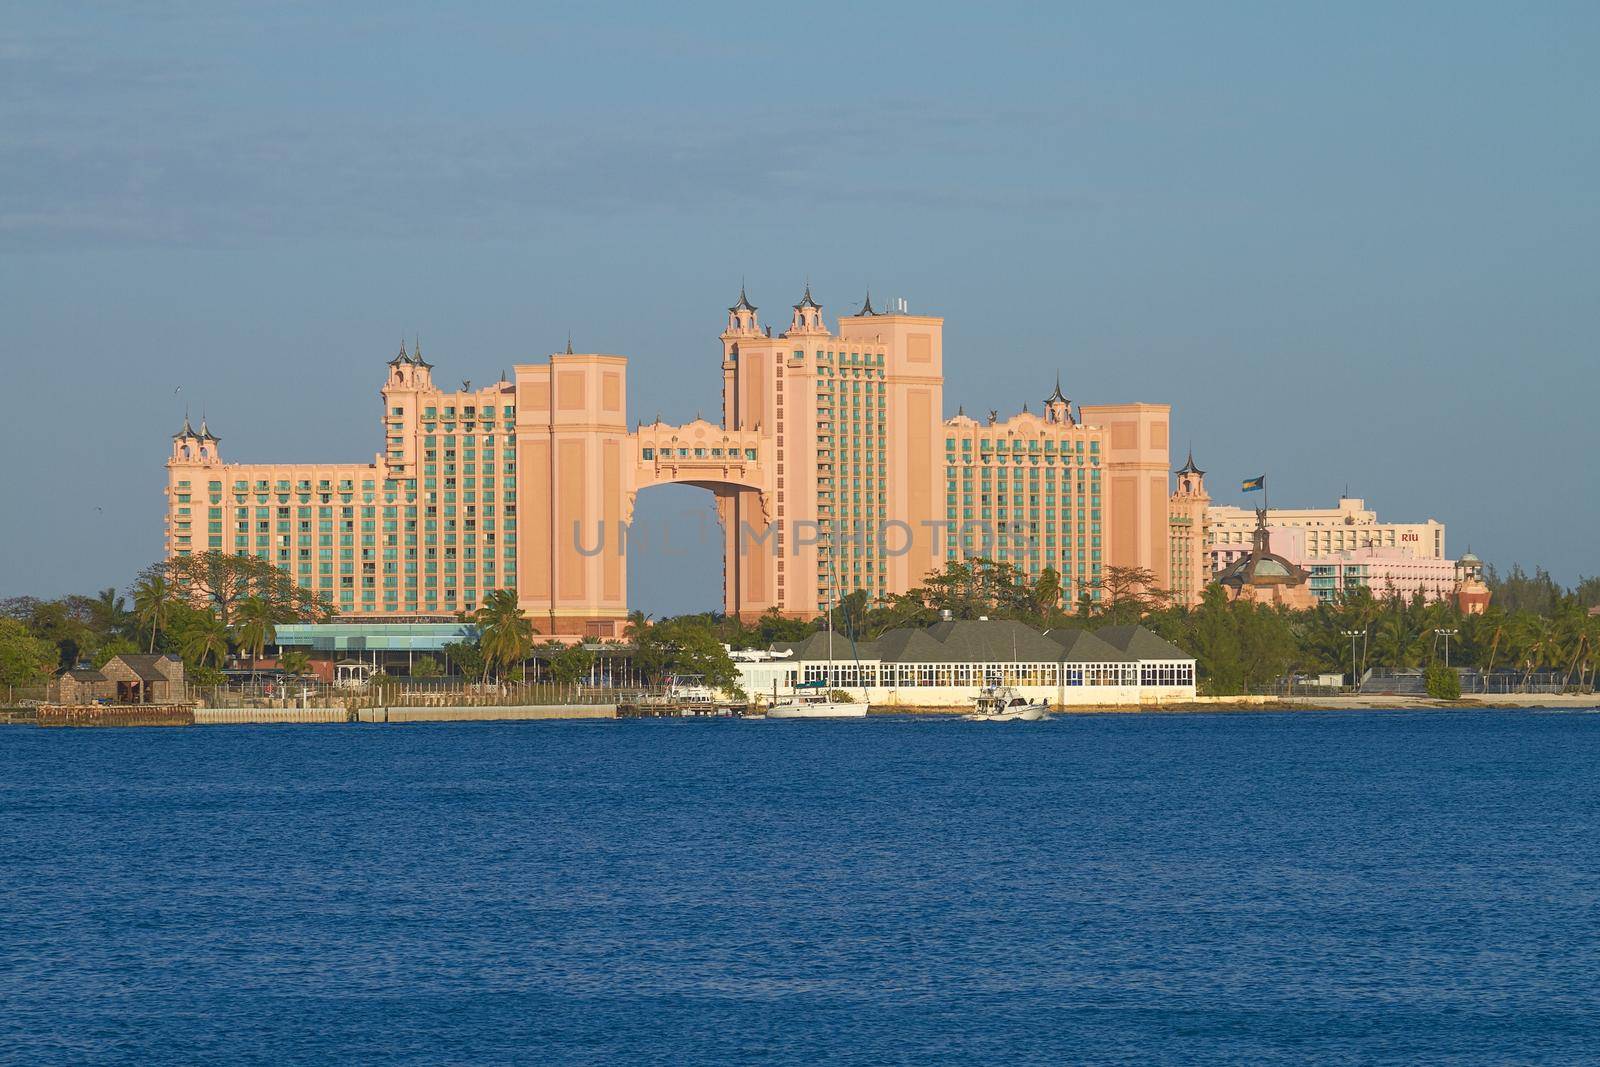 NASSAU, BAHAMAS - JANUARY 17, 2010: Atlantis Paradise Island Resort in Nassau, Bahamas. The Bridge Suite Located in the Span is the Most Expensive Suite in the World Costing Approximately $25,000 USD.